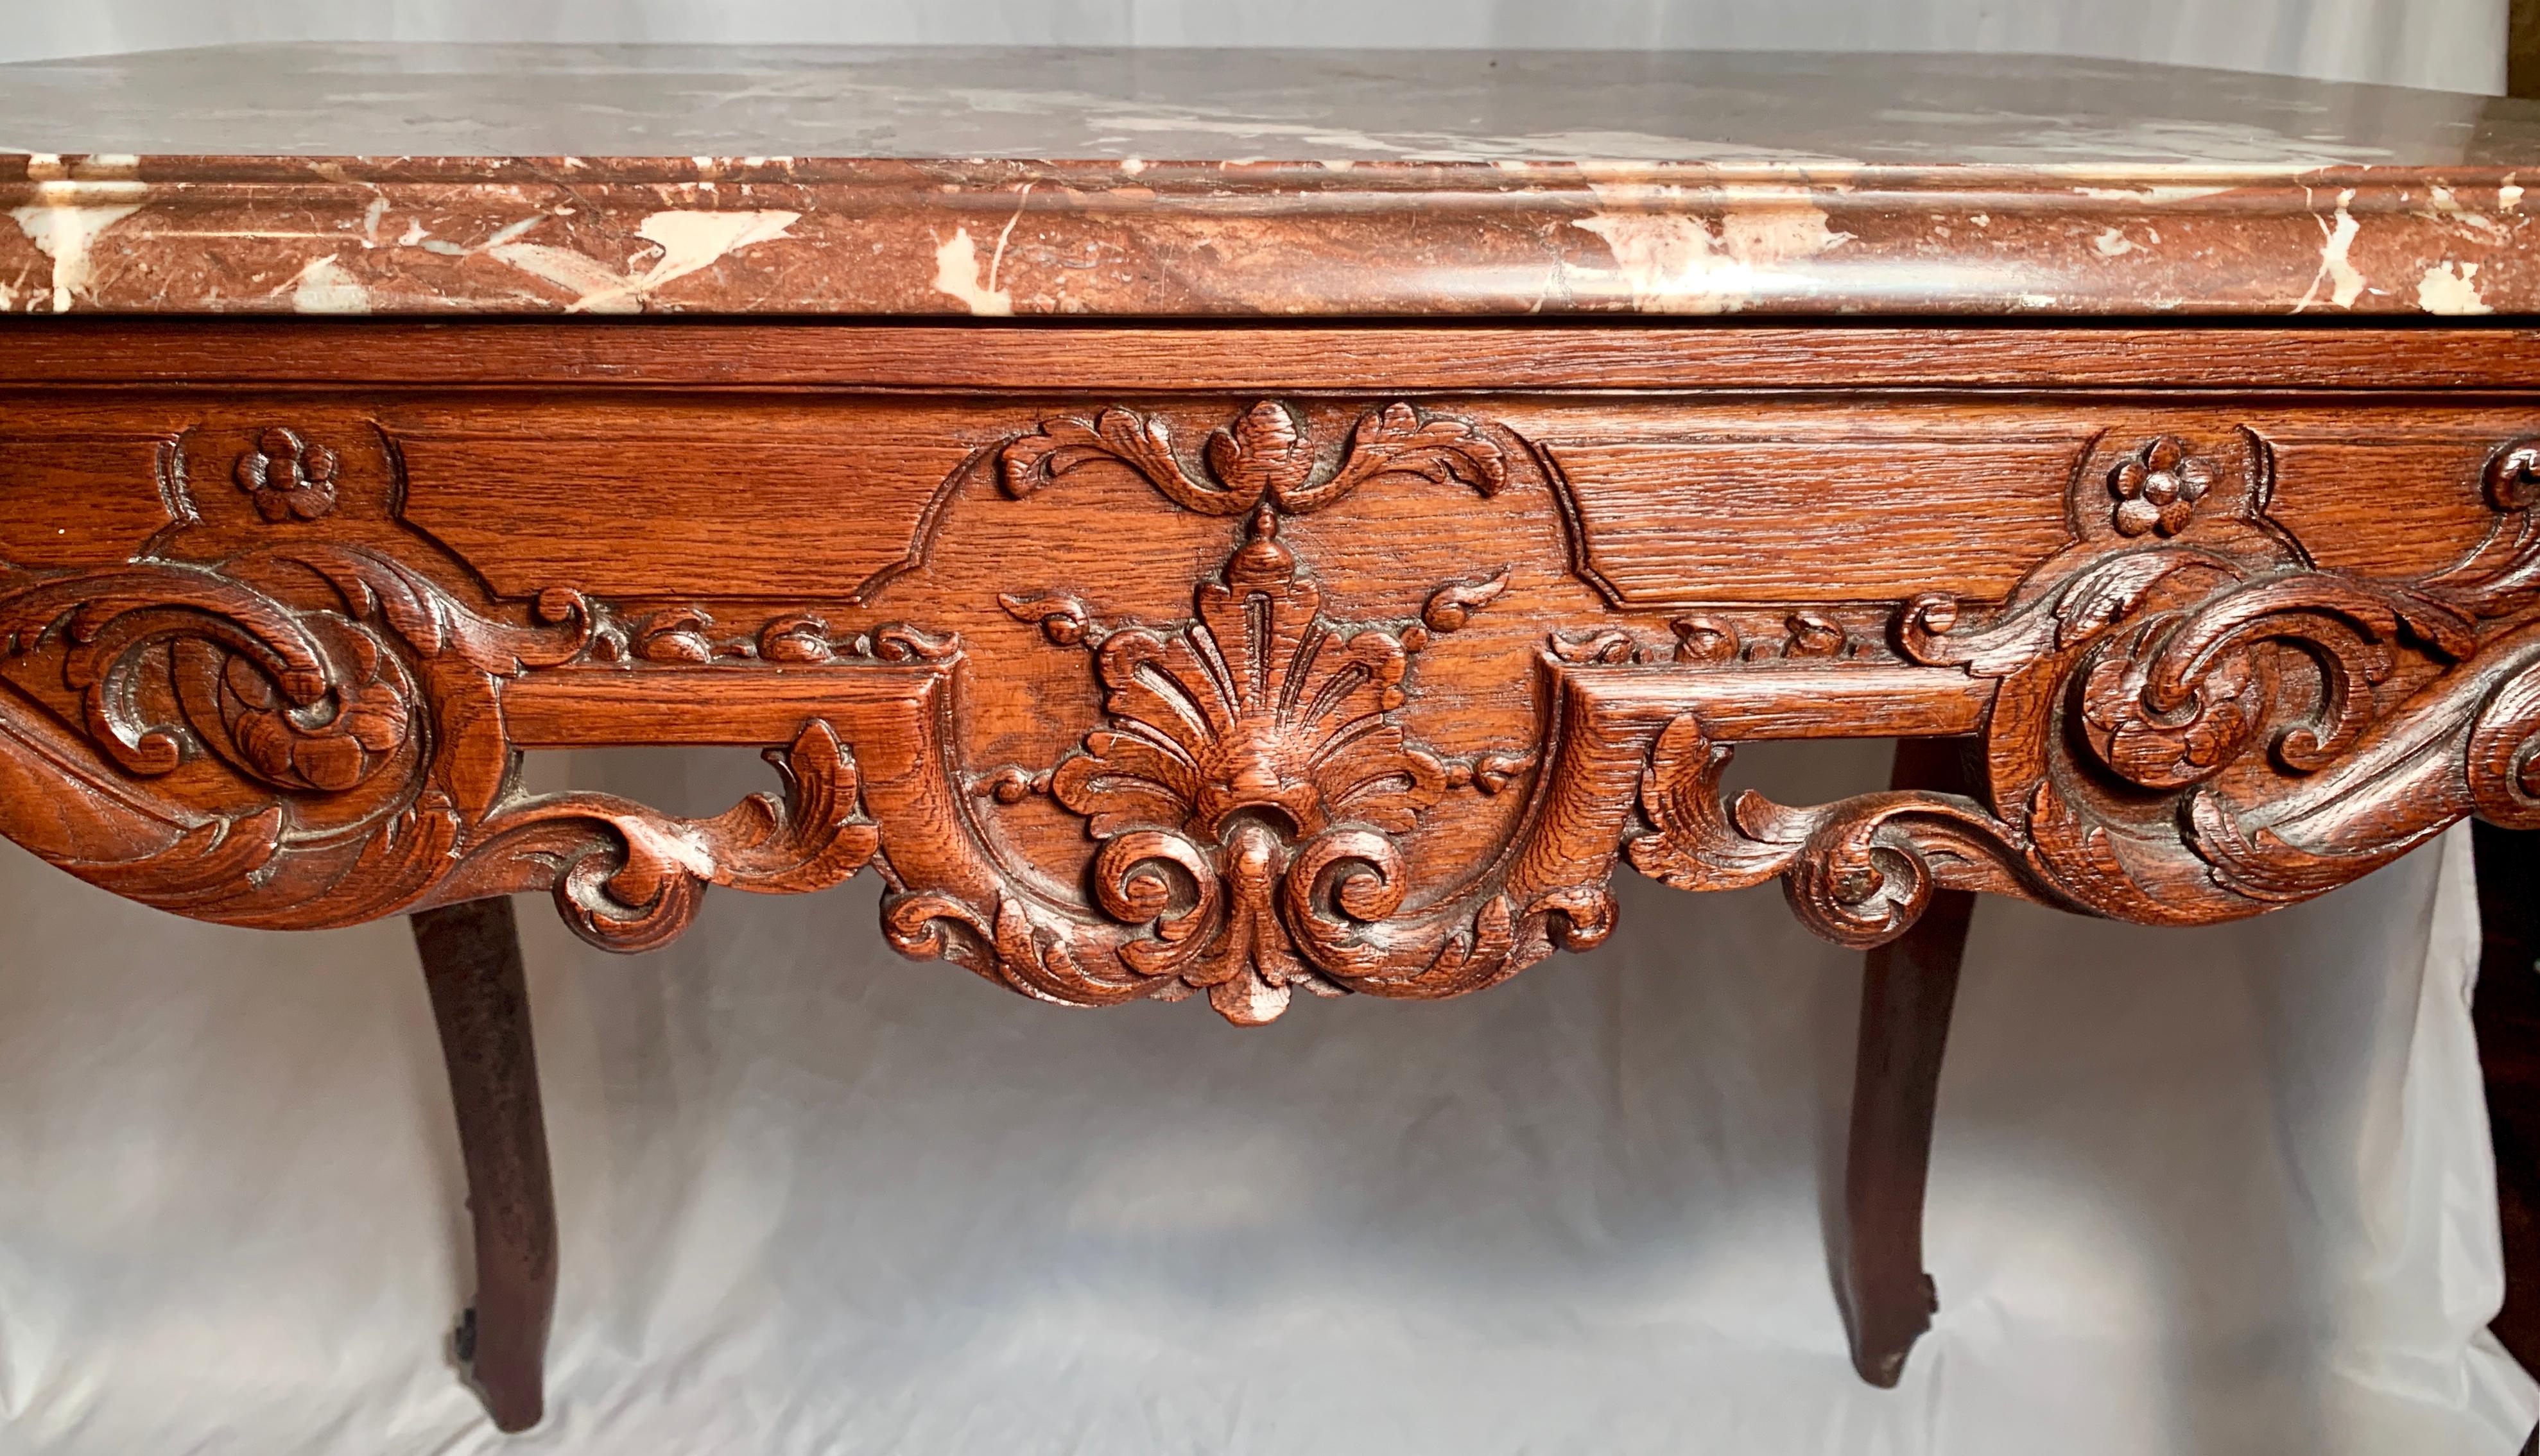 Antique French Regence oak table a Gibier with original marble circa 1770-1790
FOT076.